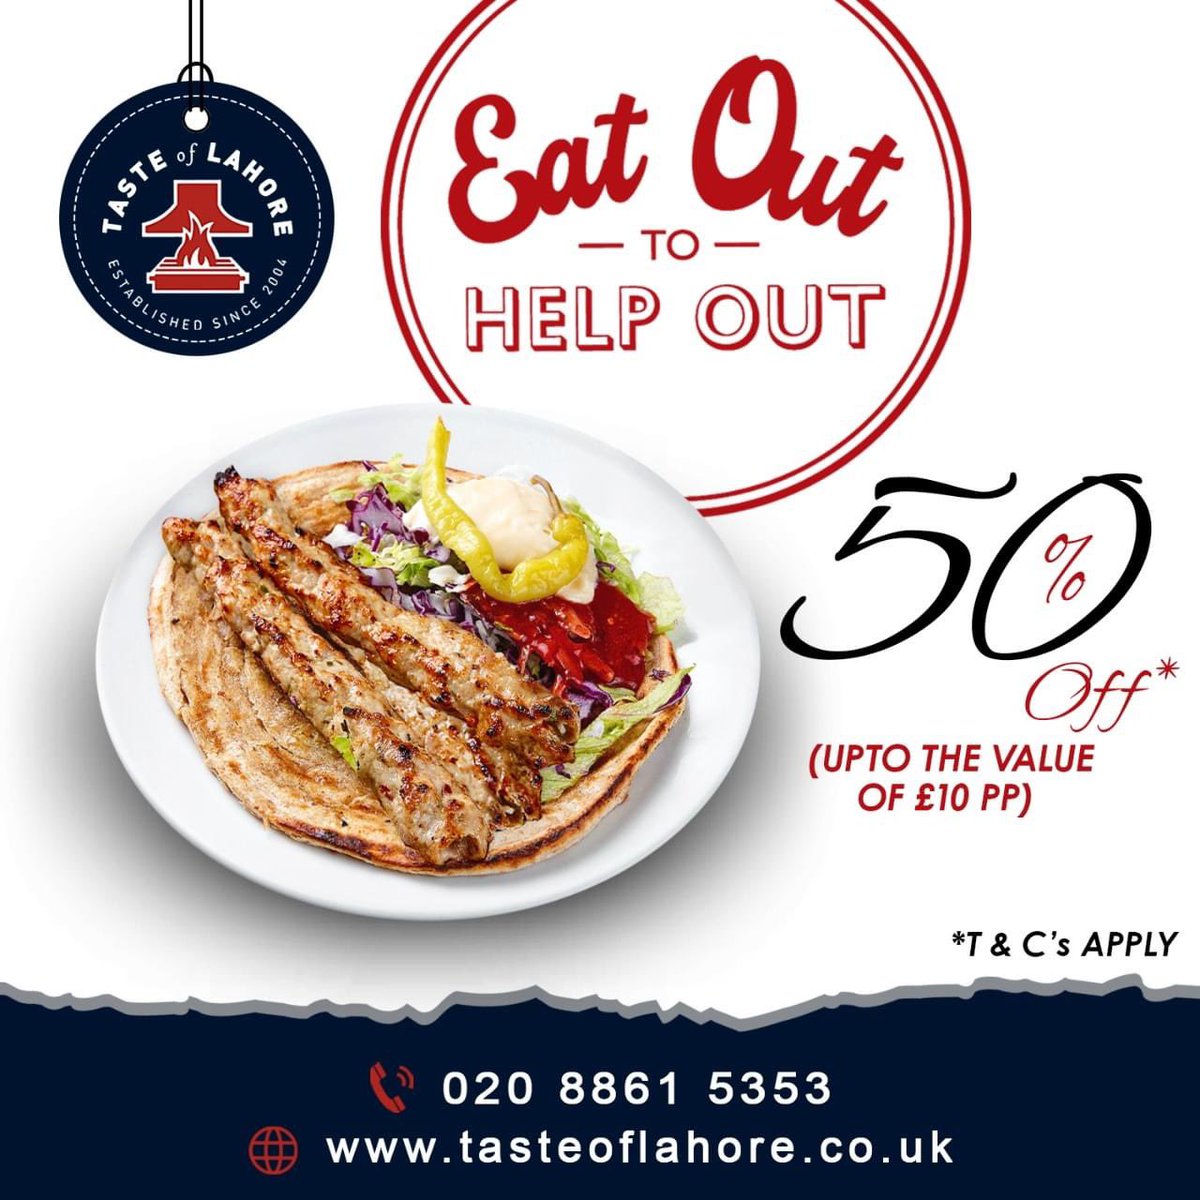 Beat the #MondayBlues with a whooping 50% off (upto the value of £10 pp) on all your favourites at Taste of Lahore #Harrow.

#eatoutlondon #eatouttohelpout #augustoffer #dinein #dineinoffer #halfprices #harrow #TasteofLahore #mondayblues #mondaymotivation #foodielondon